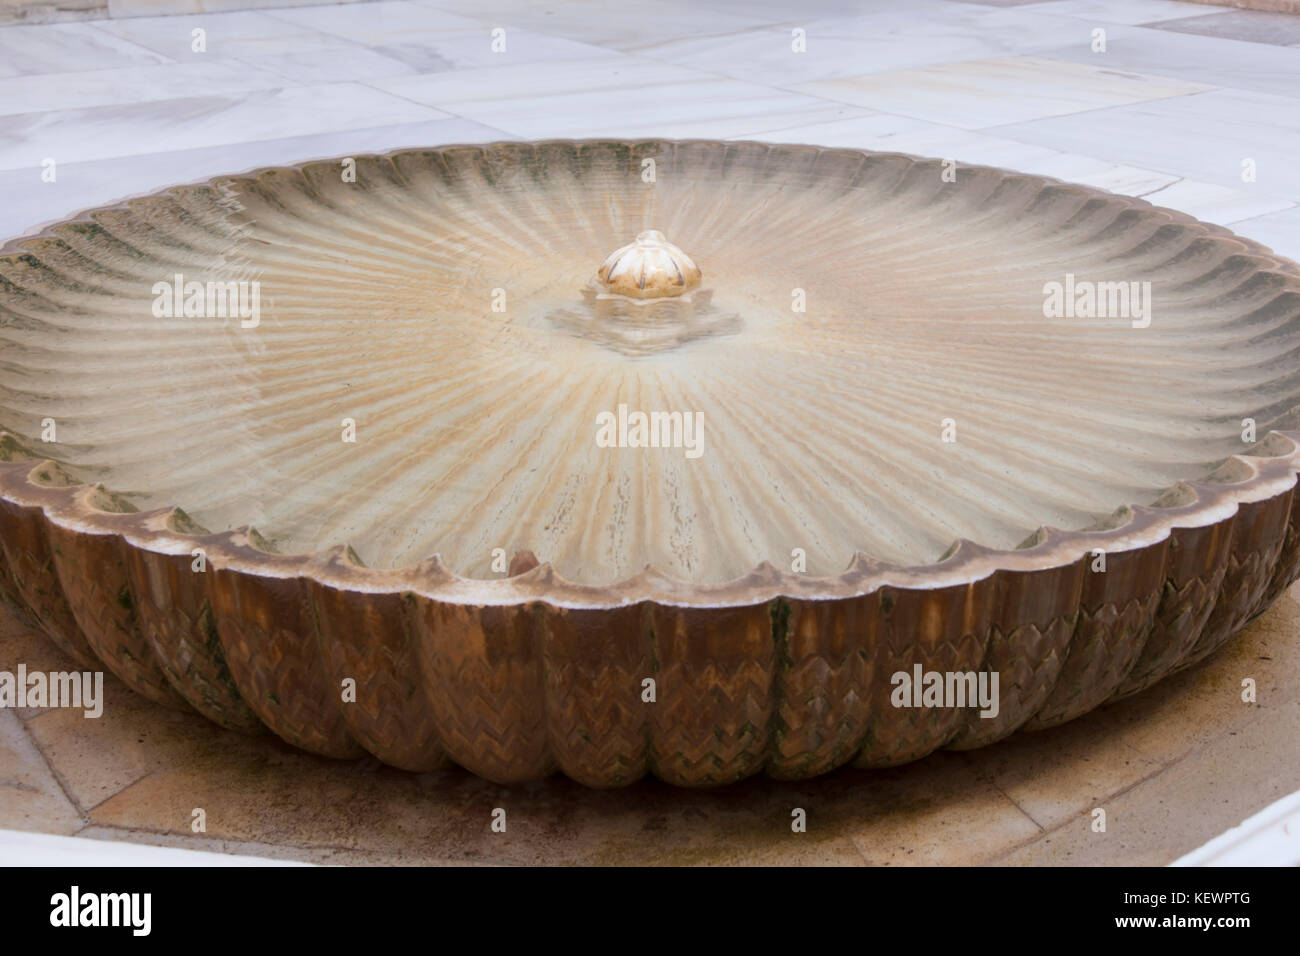 Granada, Spain: The Alhambra Palace and Fortress. Dry fountain in the Cuarto Dorado (Patio of the Gilded Room) in the Palacio Nazaríes. Stock Photo